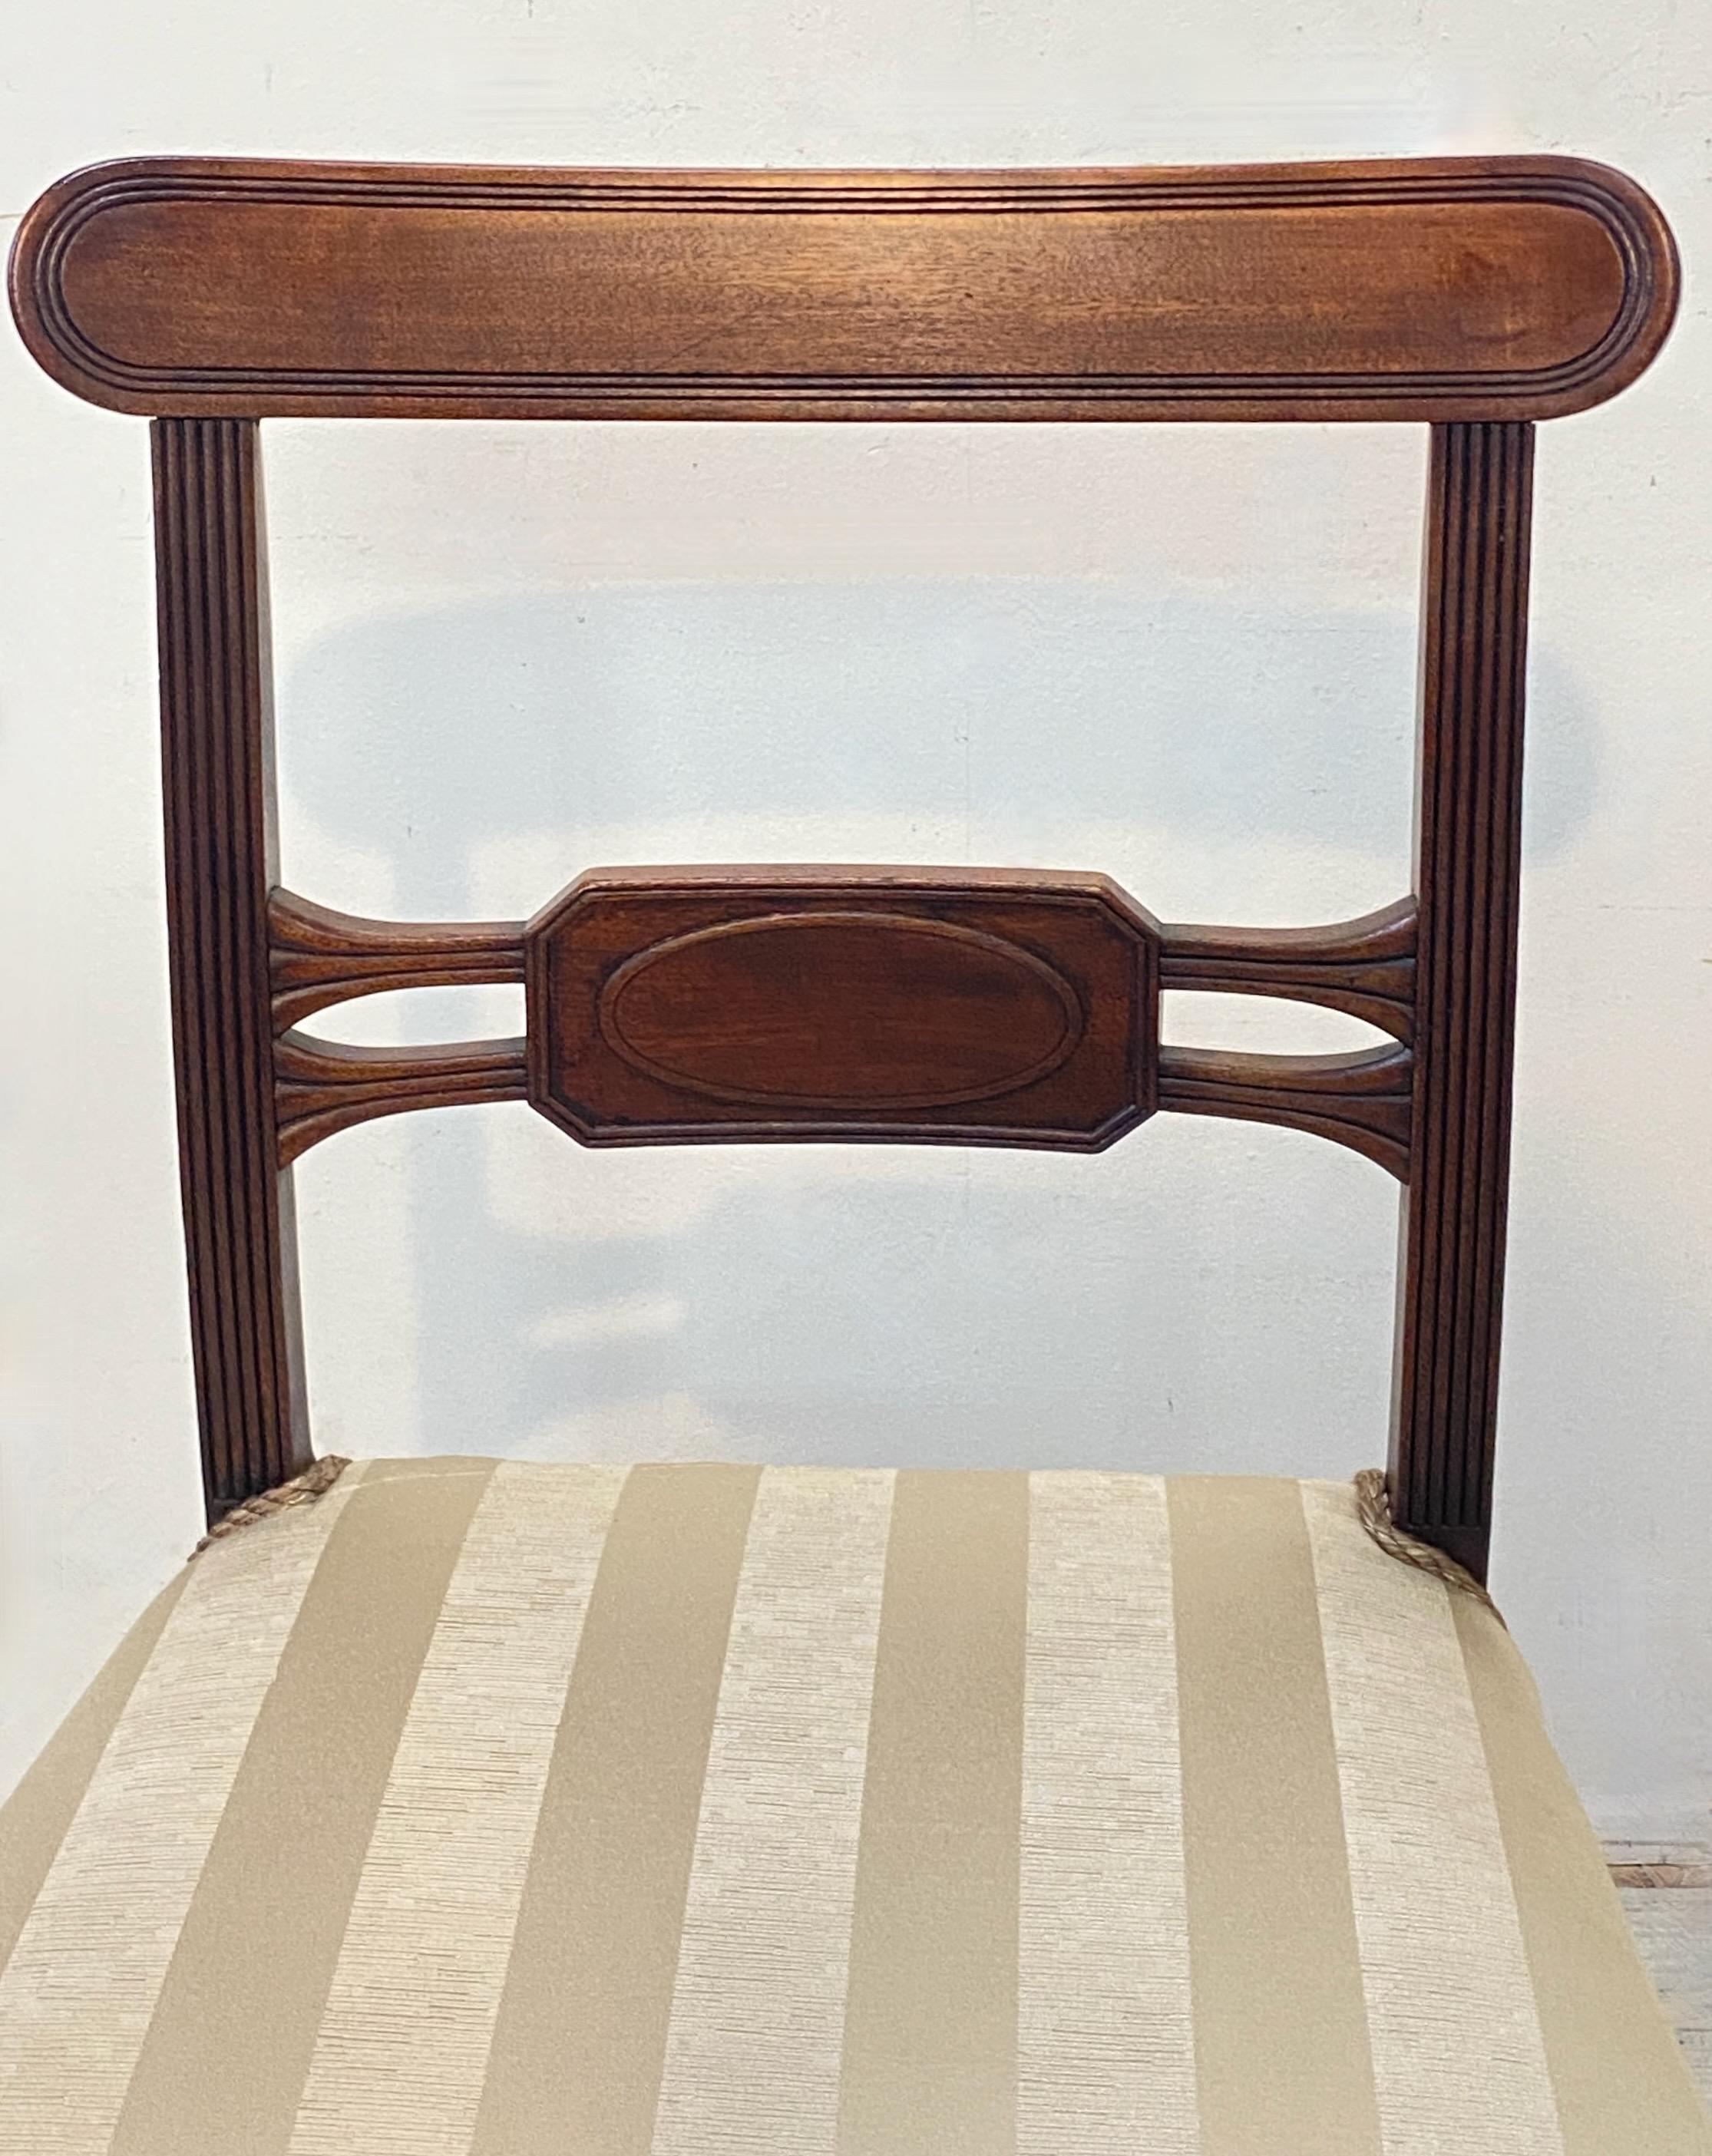 Set of 4 Early 19th Century English Regency Mahogany Dining Chairs, circa 1820 For Sale 3